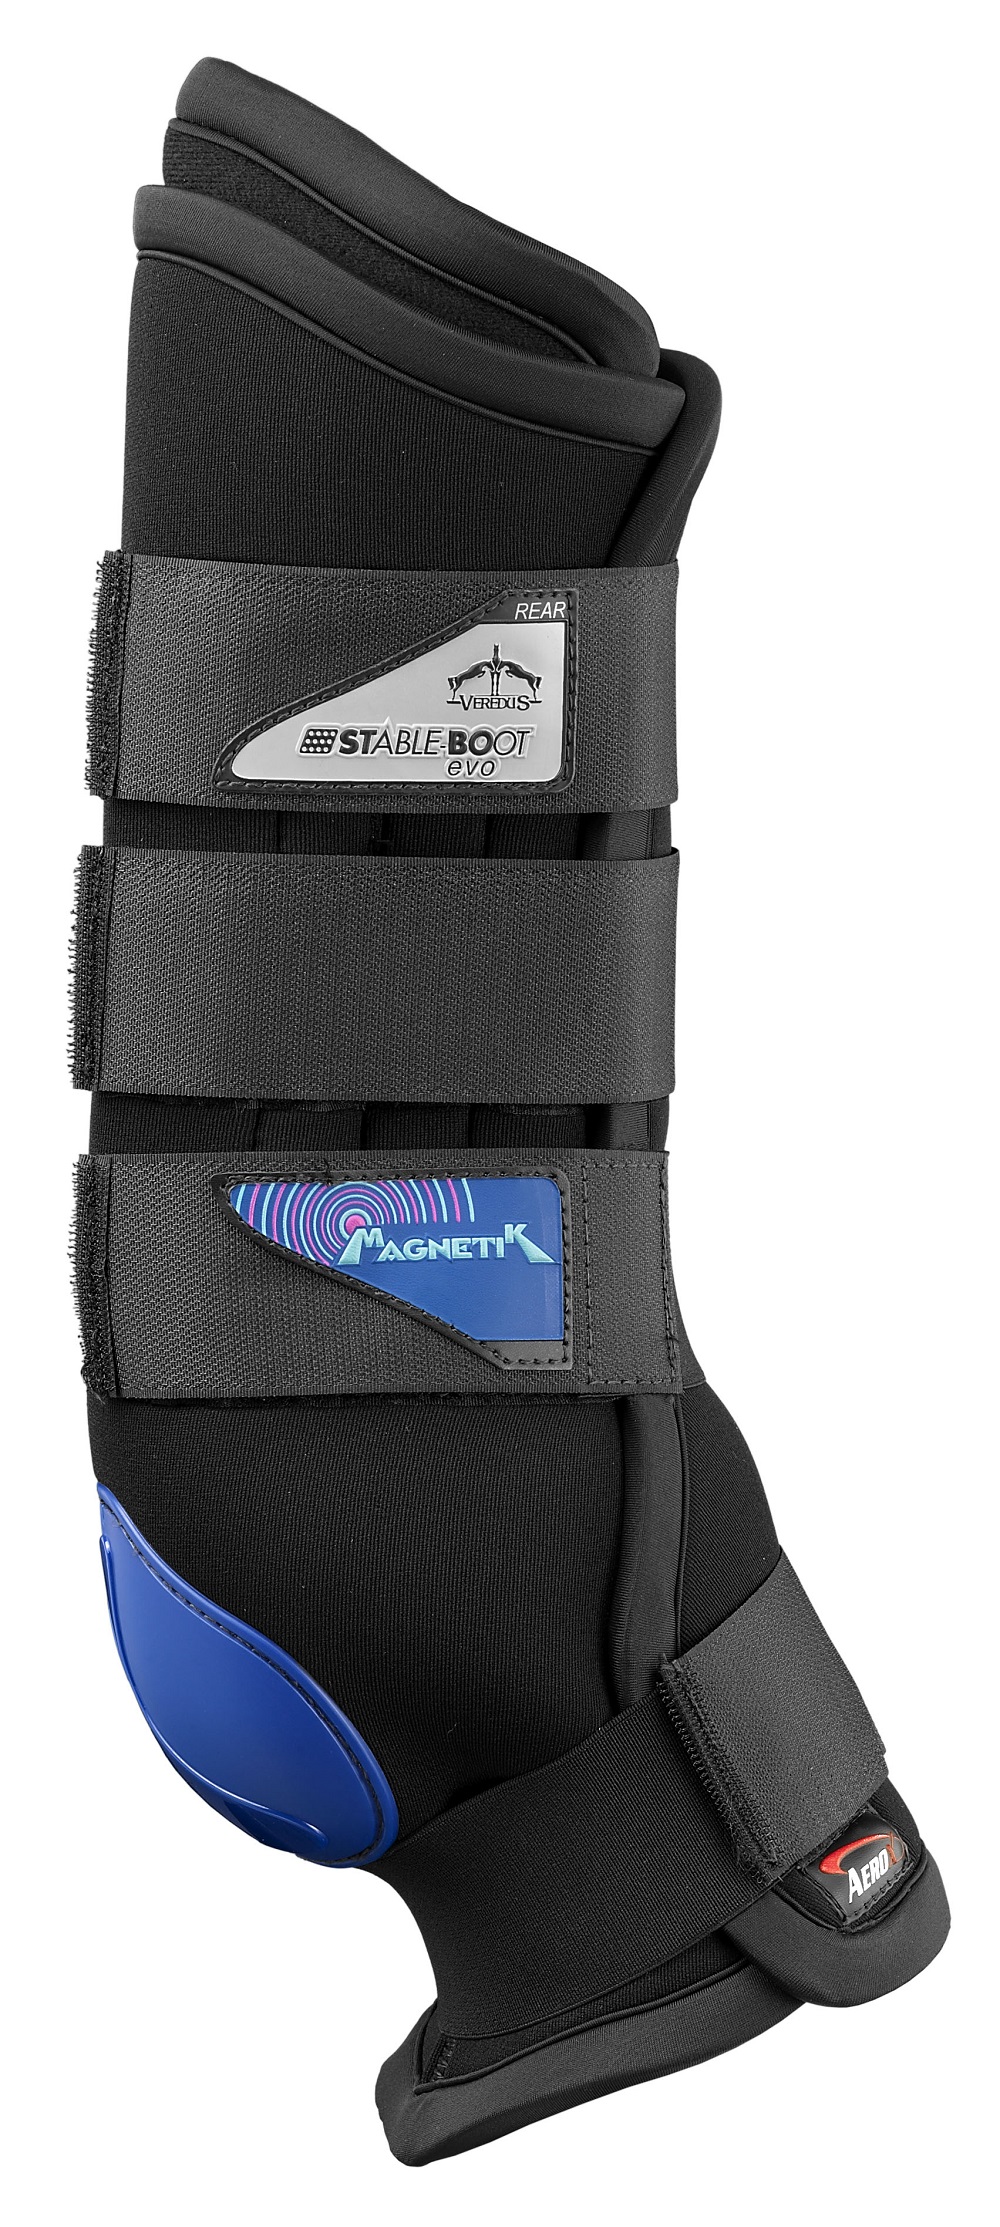 Magnetik Stable Boot Evo Rear, Magnet Gamasche